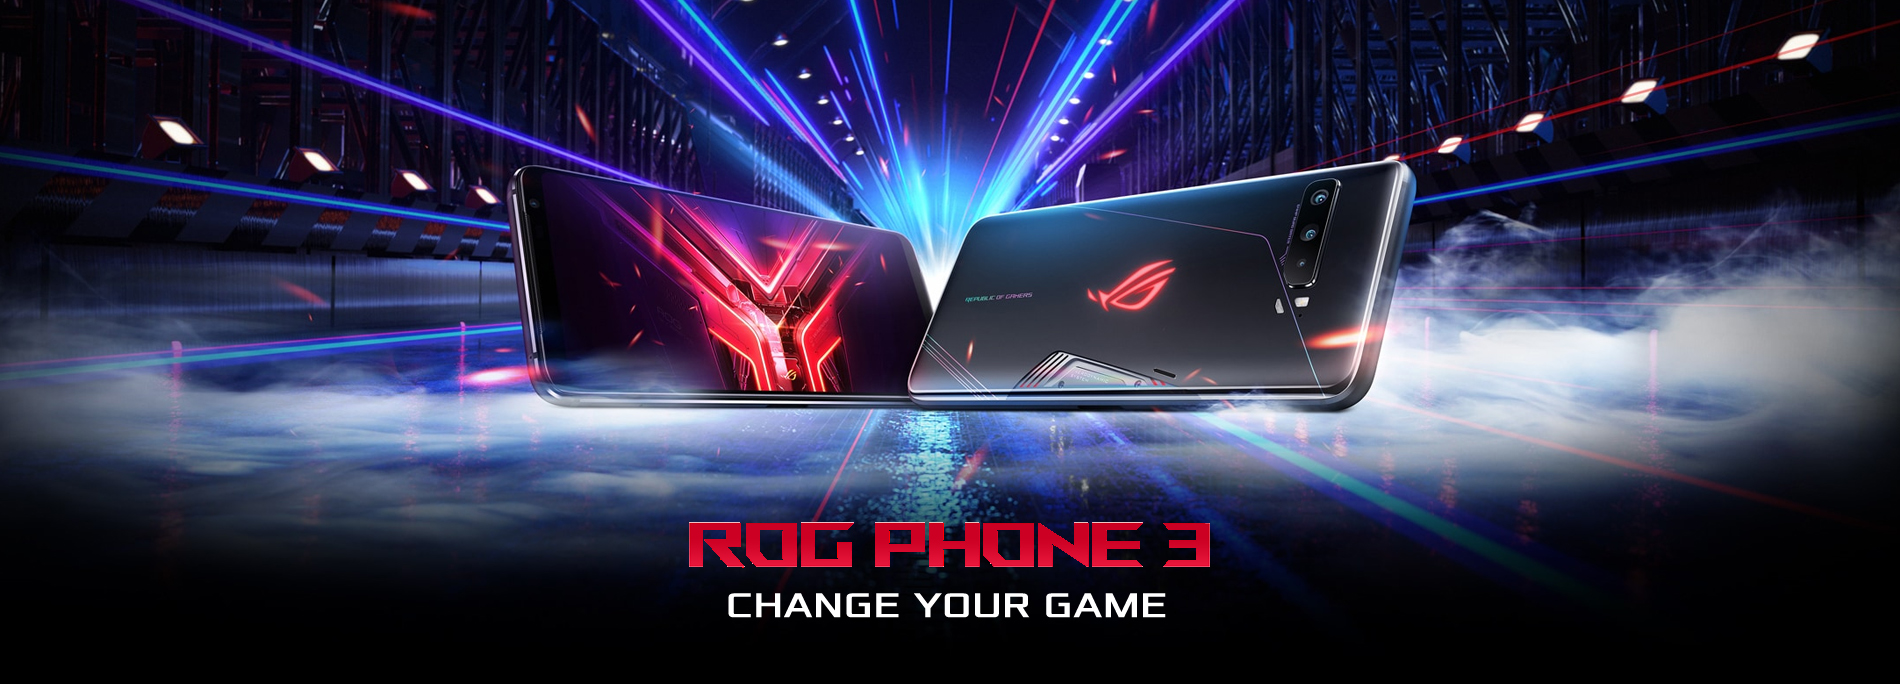 ROG Phone 3 Campaign Page